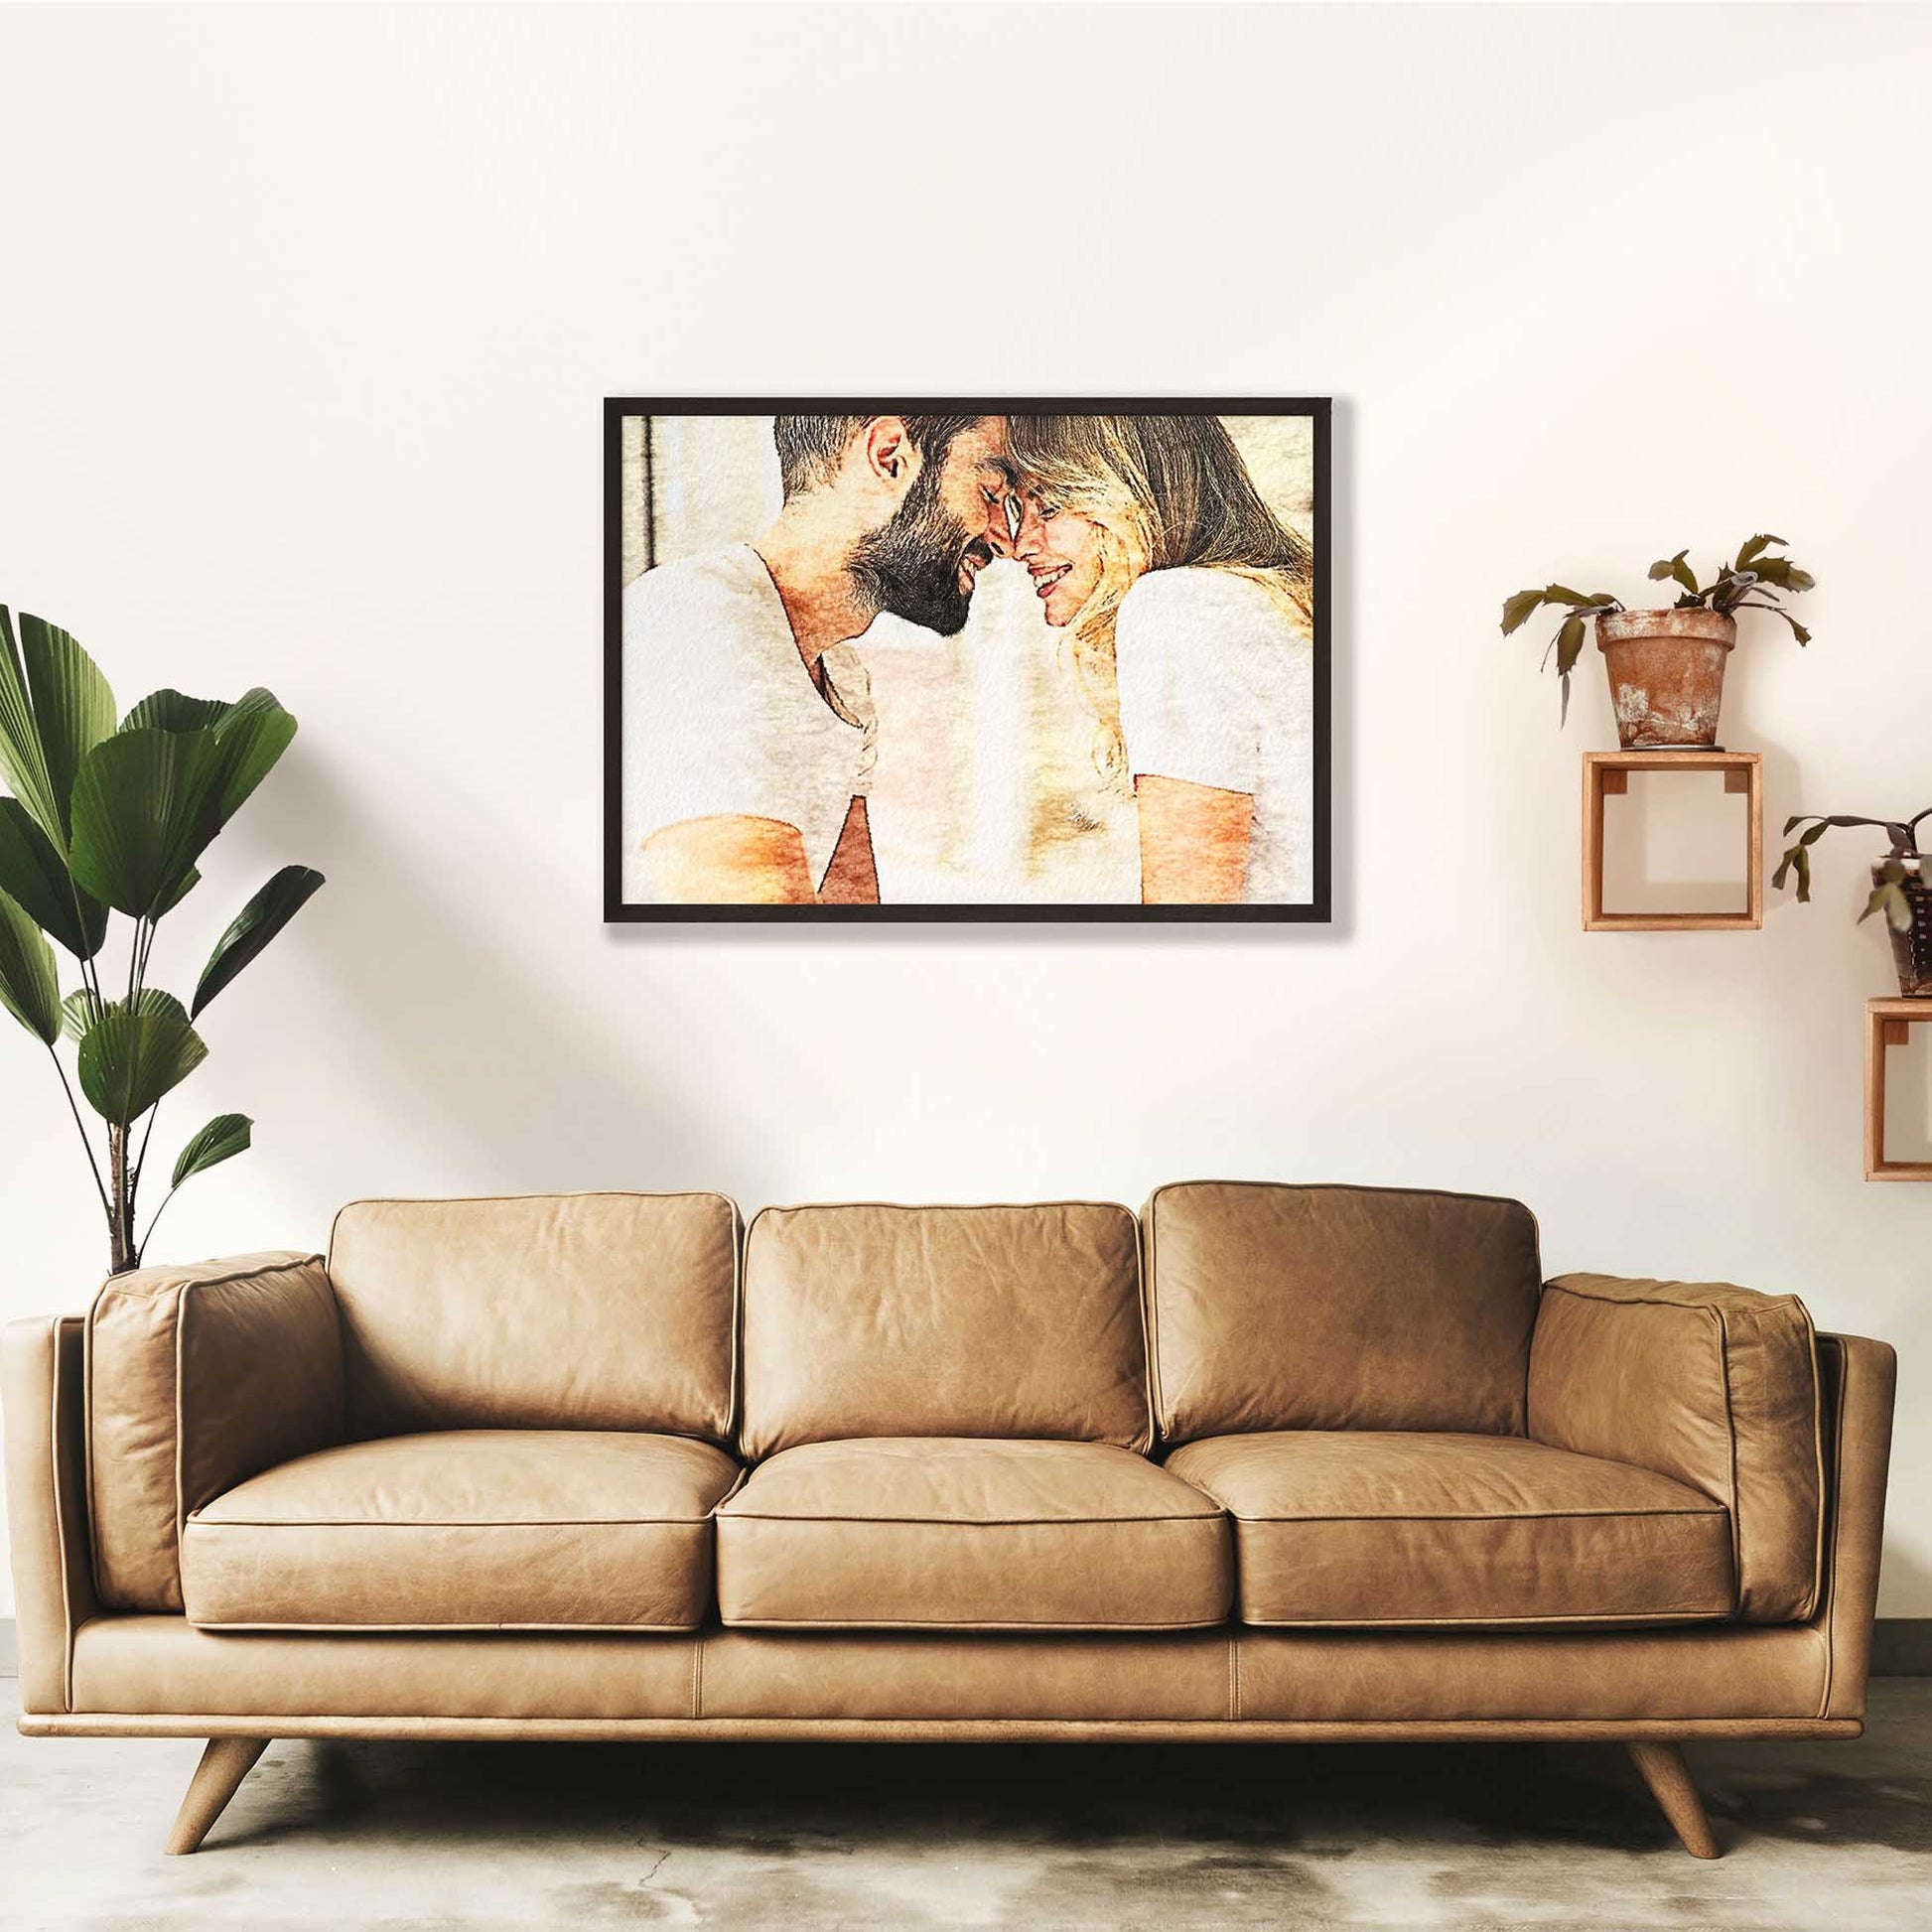 Make a lasting impression with a Personalised Watercolor Painting Framed Print. Its striking colors and artistic flair create an exciting visual impact that draws attention from every angle. Display it in your home 